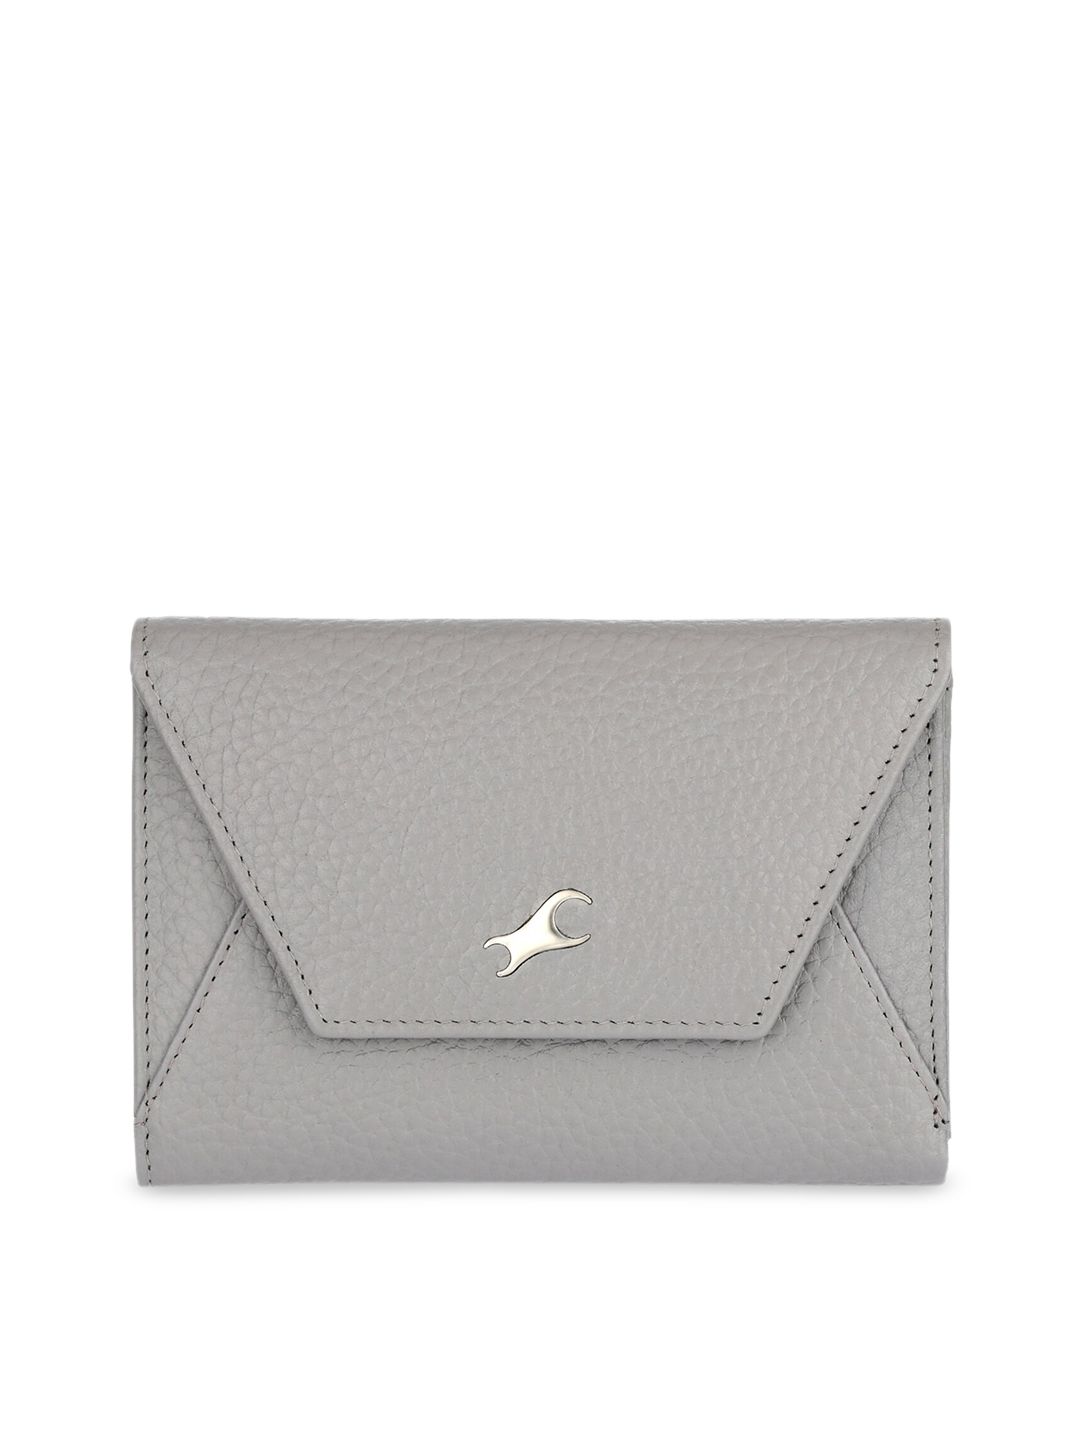 Fastrack Women Grey & Grey Self Design Two Fold Leather Wallet Price in India